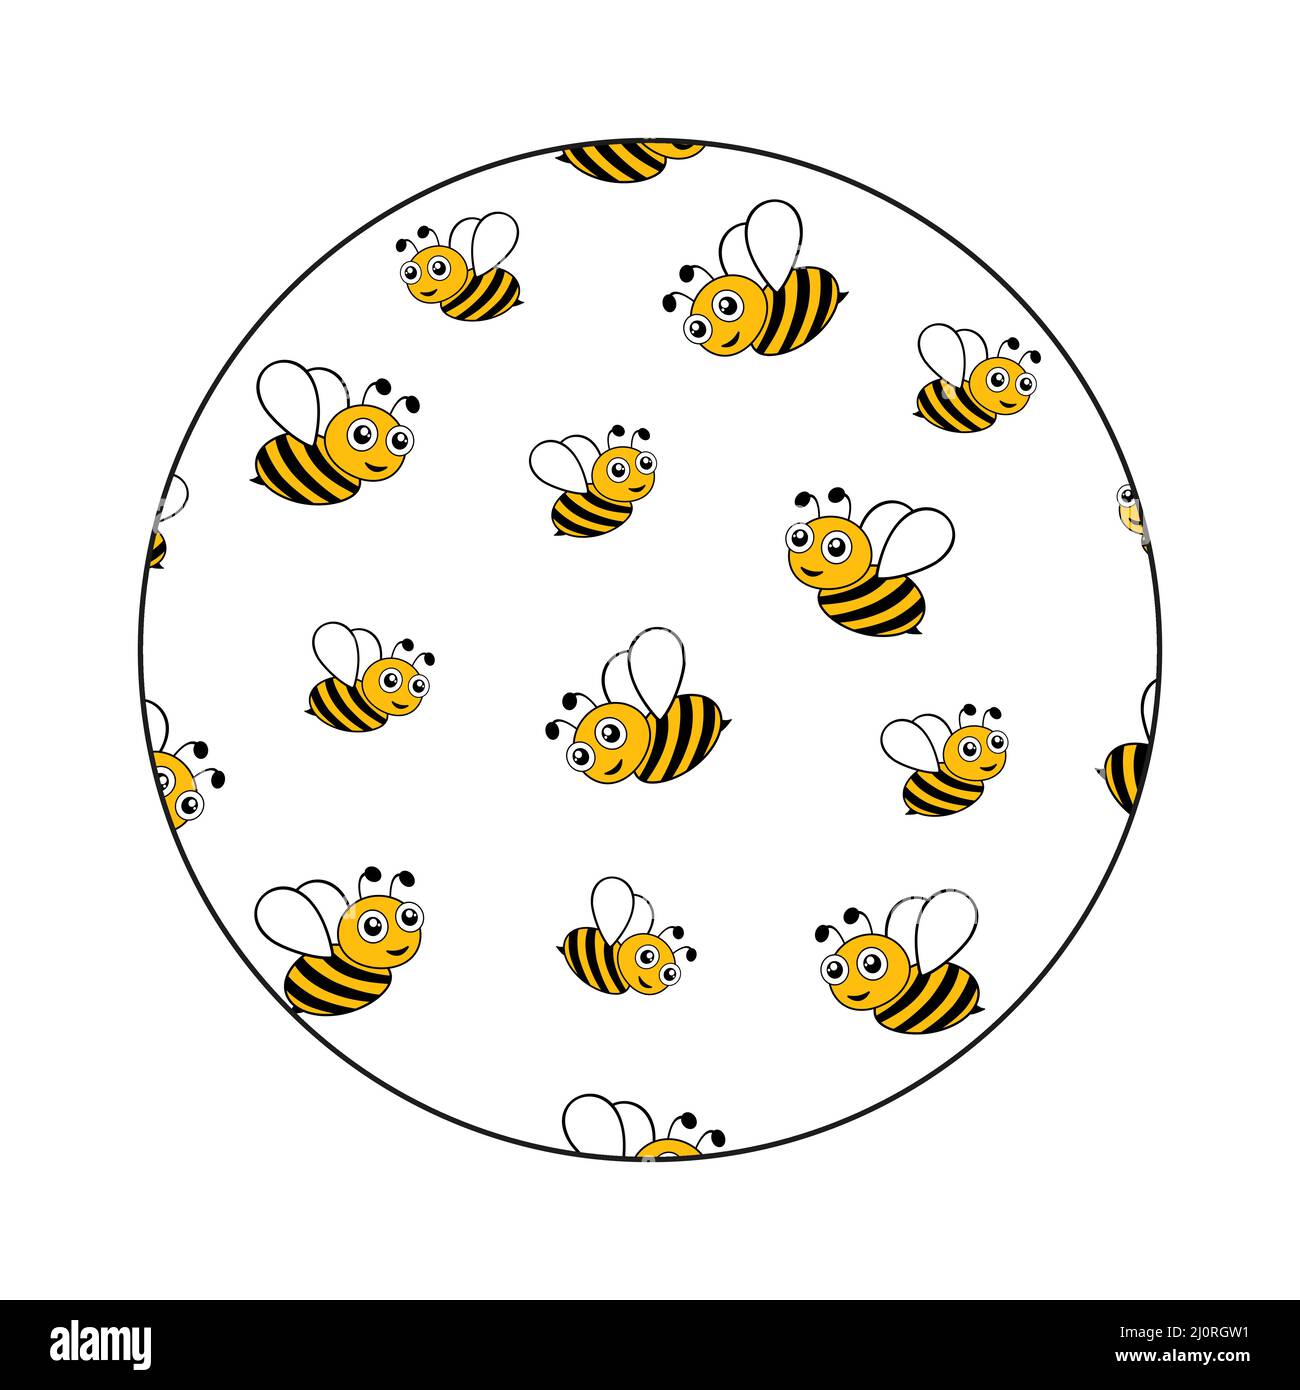 Flying bees in round shape. Black and yellow bees isolated on white background. Stock Vector